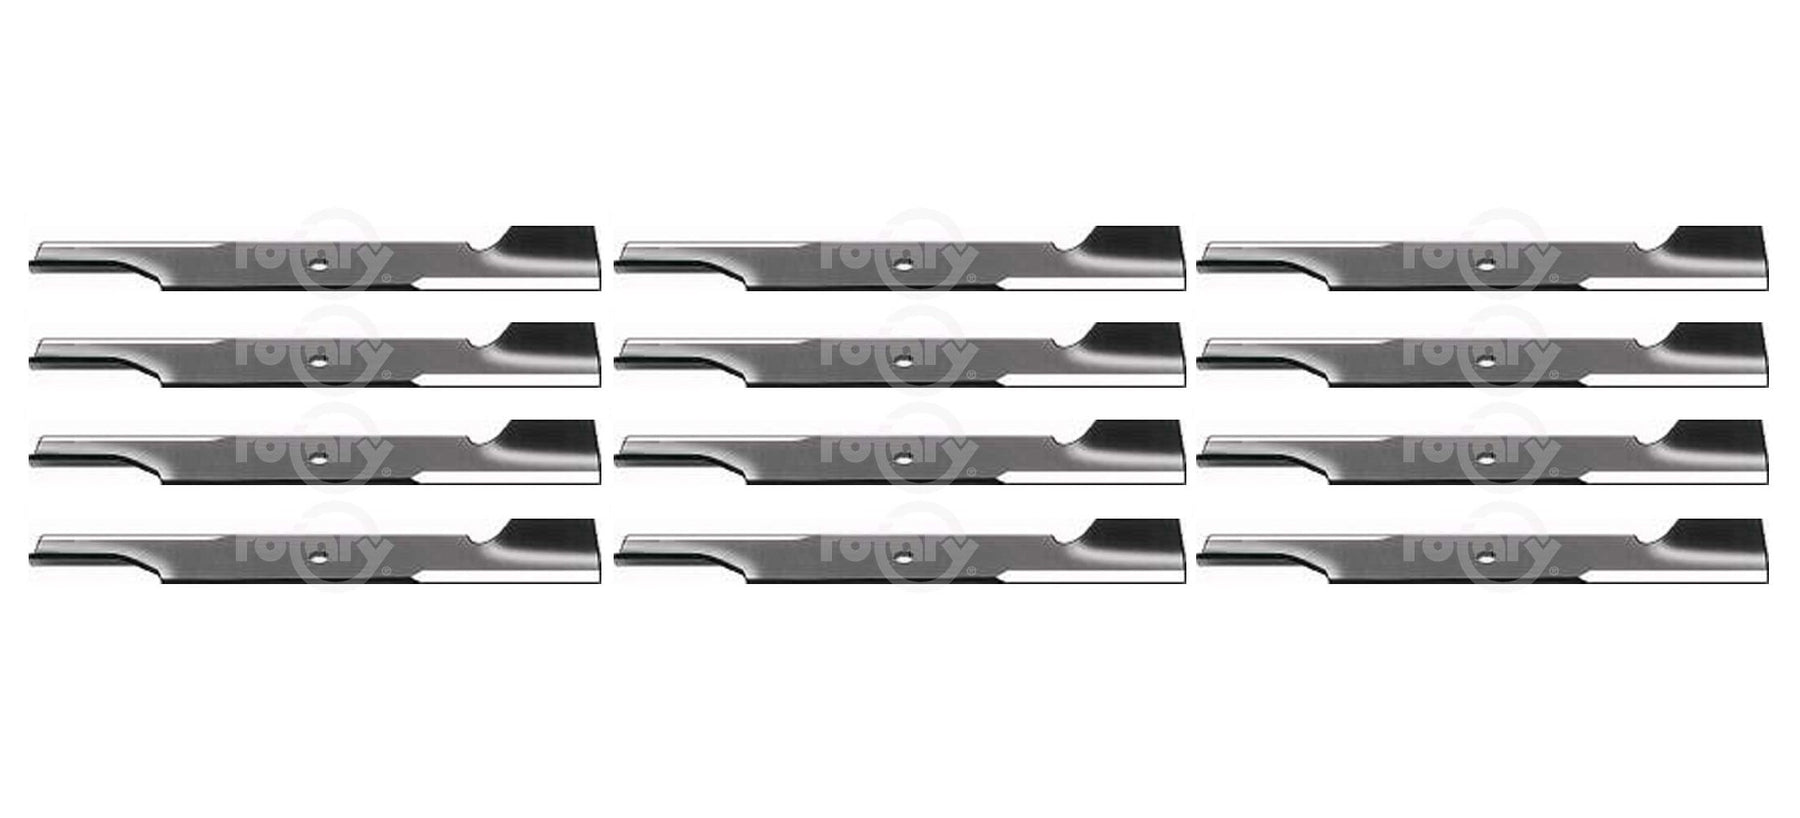 12 Pack Lawn Mower Blades Fits Wright 71440002